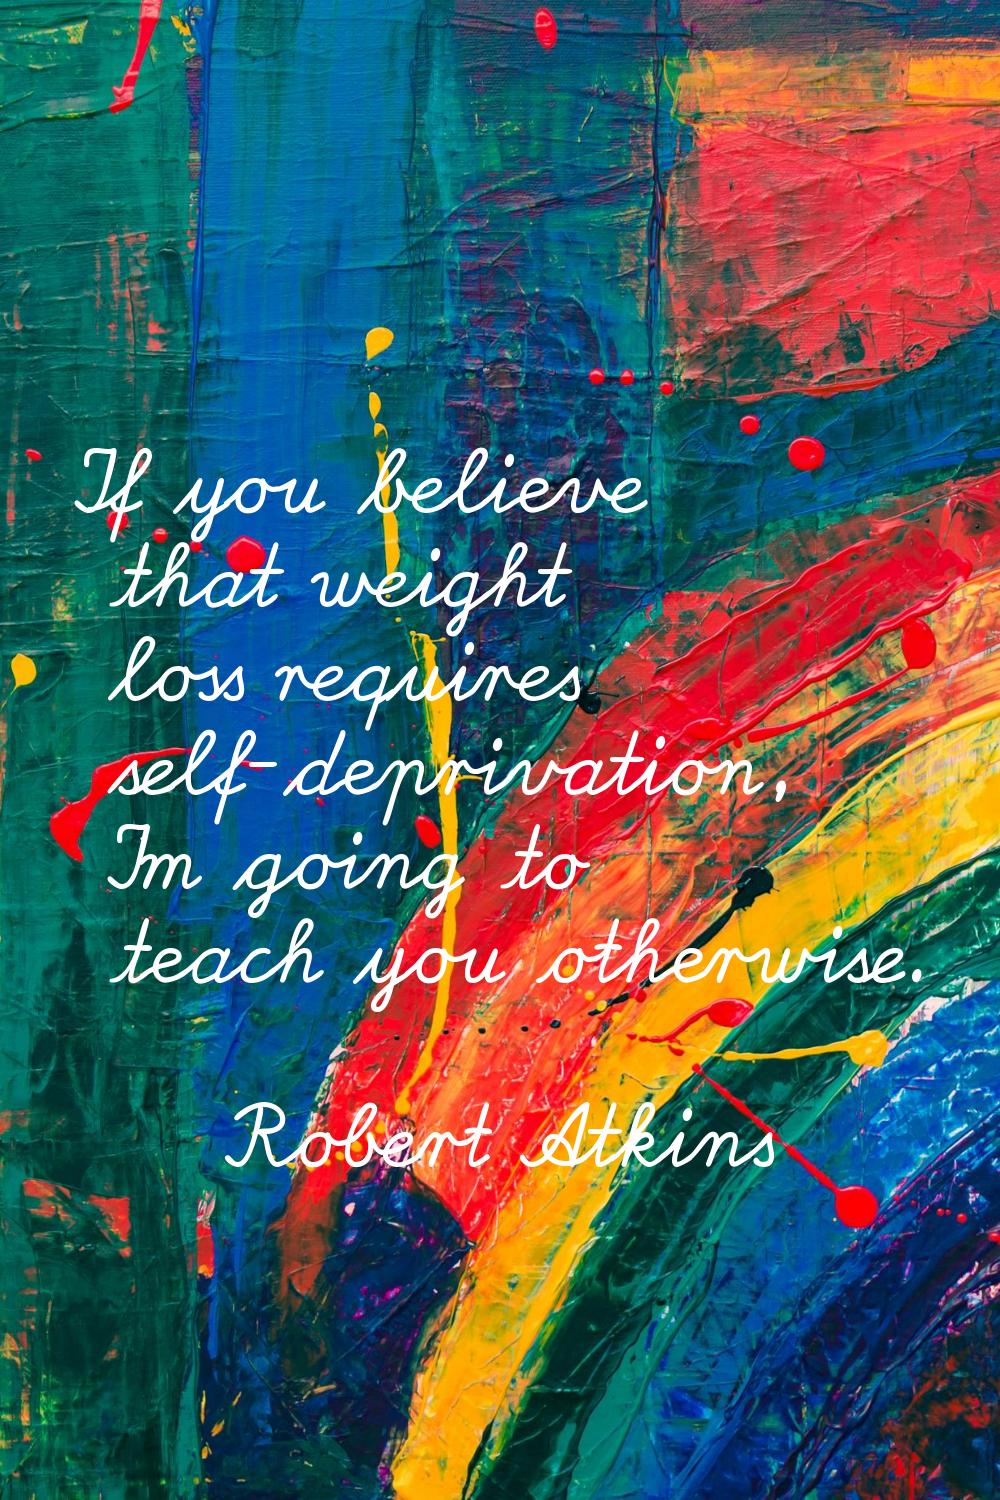 If you believe that weight loss requires self-deprivation, I'm going to teach you otherwise.